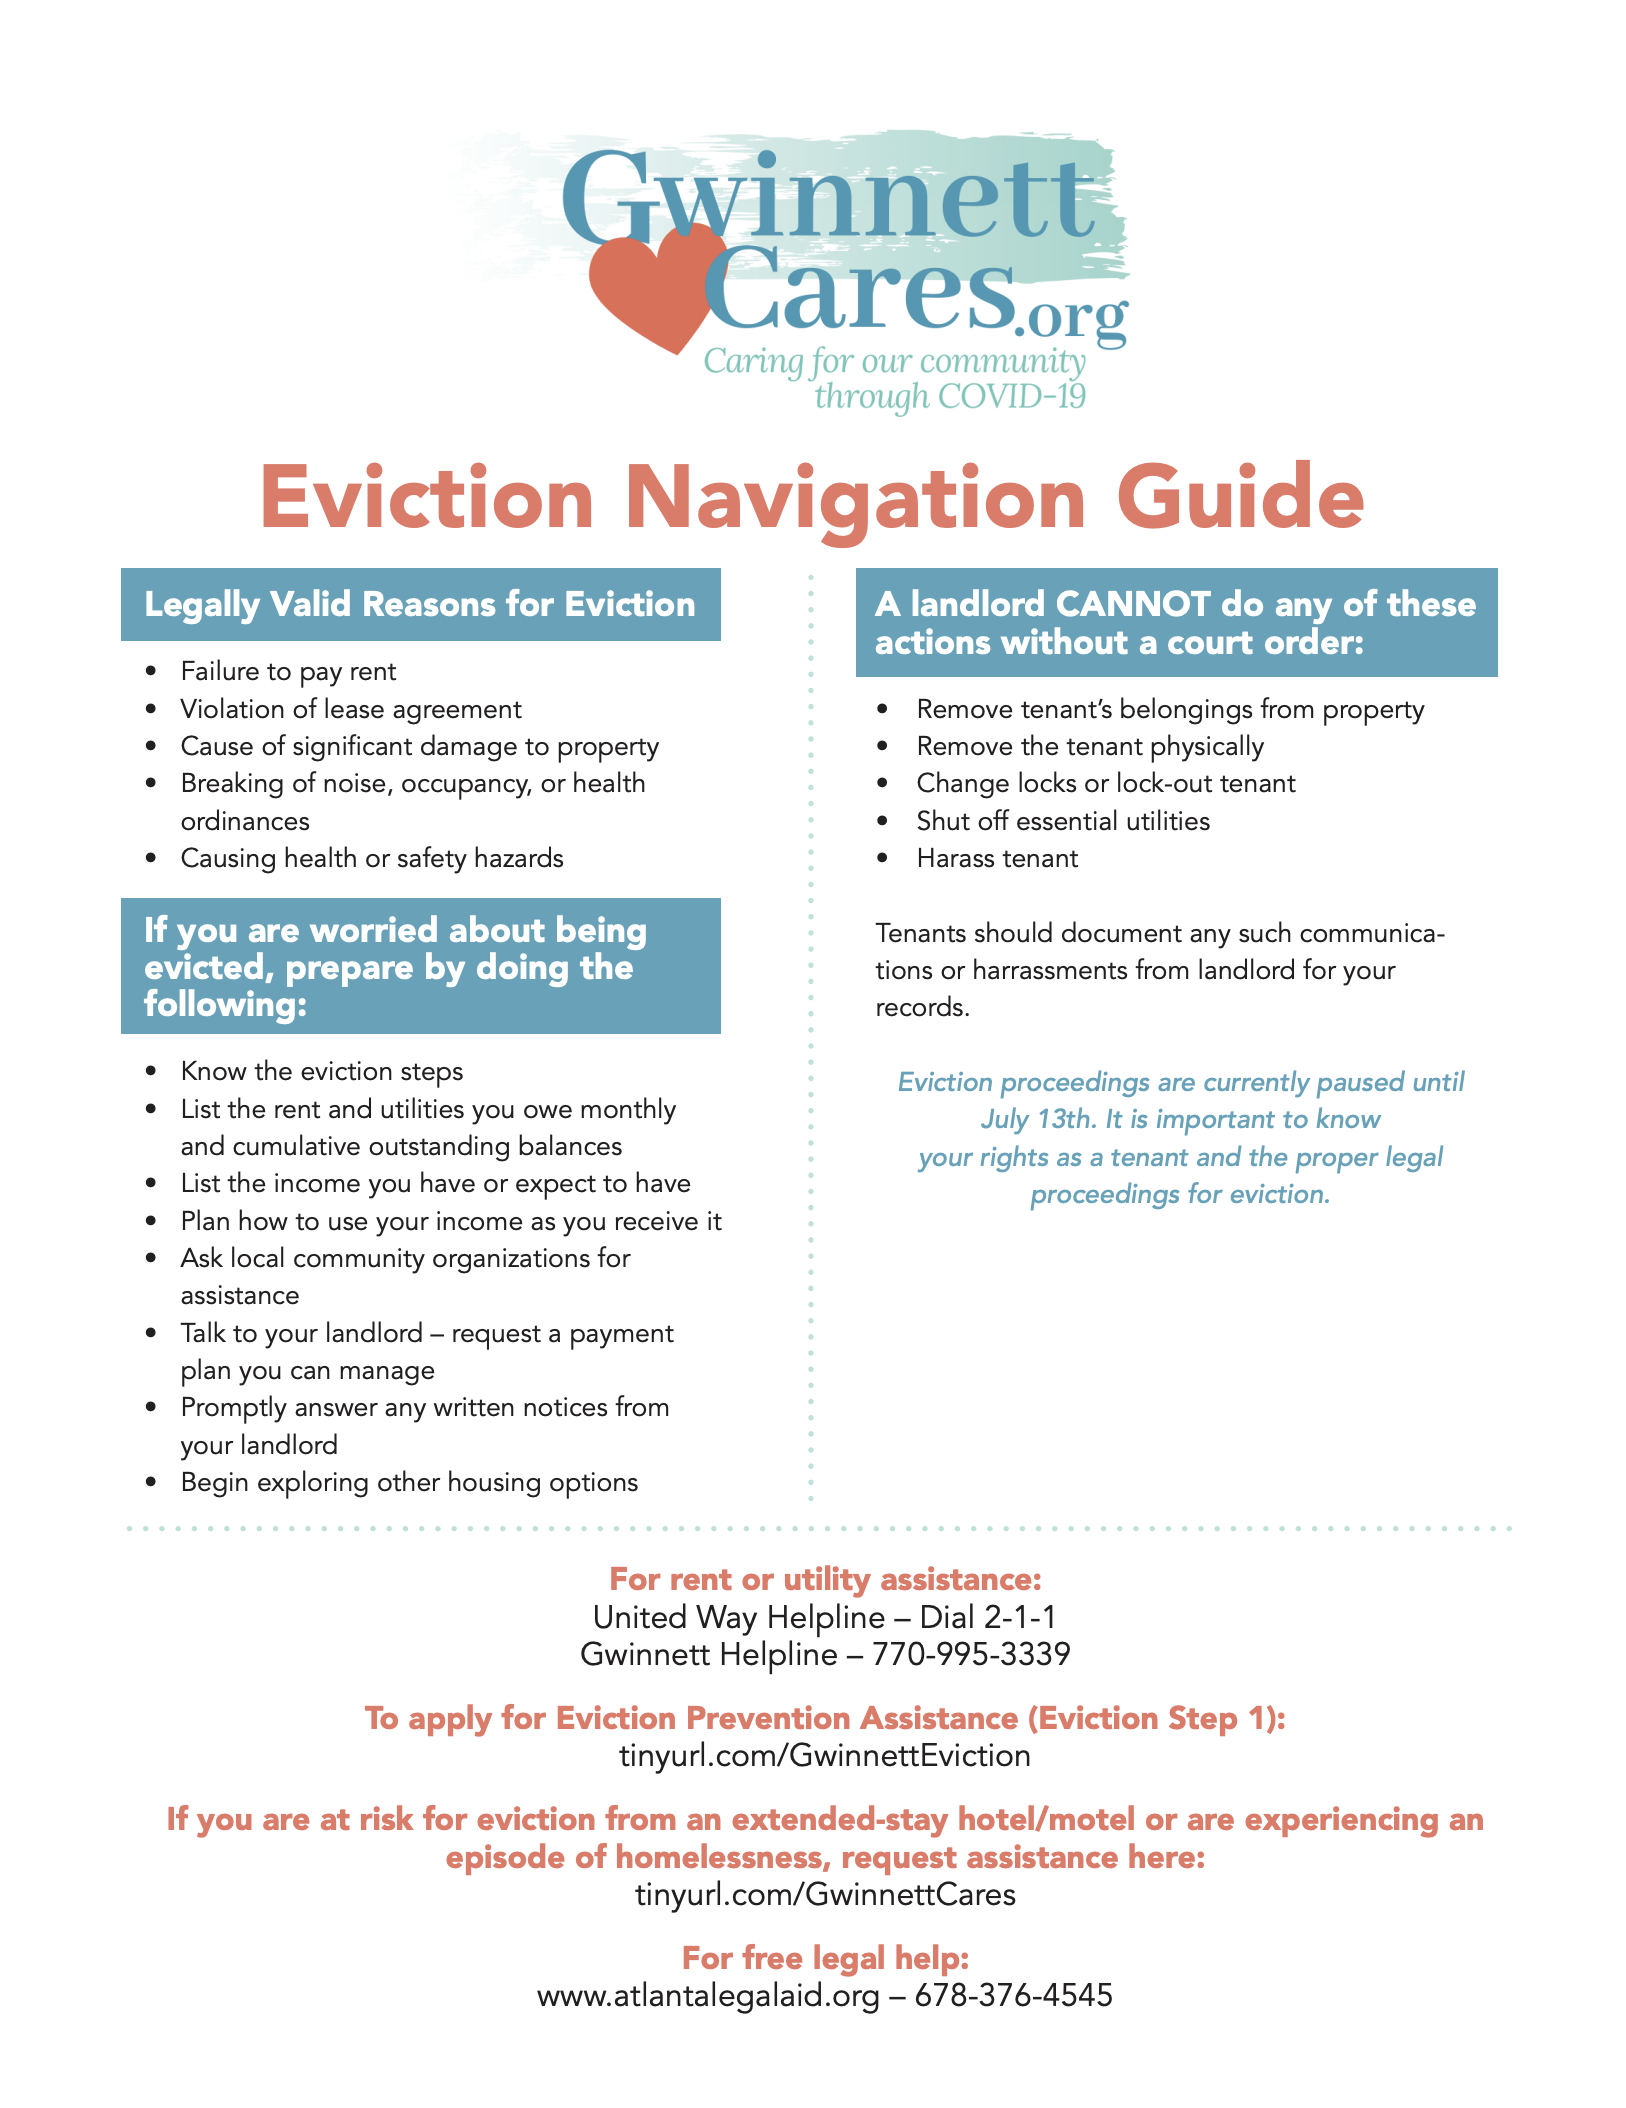 GCares_EvictionGuide_Eng